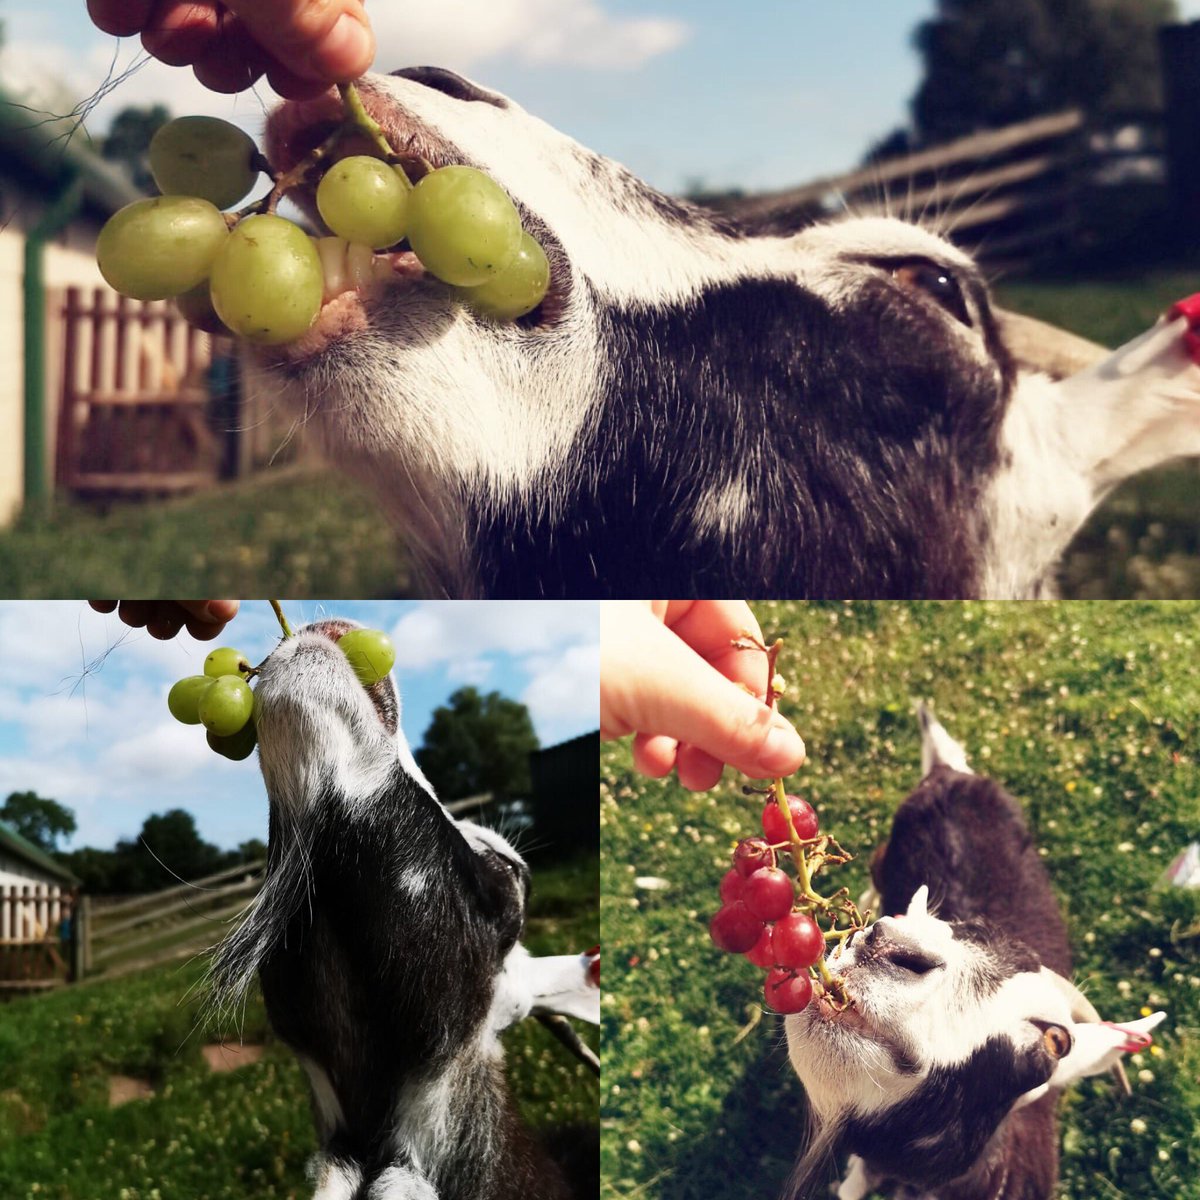 Matilda has been enjoying the sunny weather with a few grapes! #summersnacks #rescuegoat #sunnydays #munchies #summer #carlisle